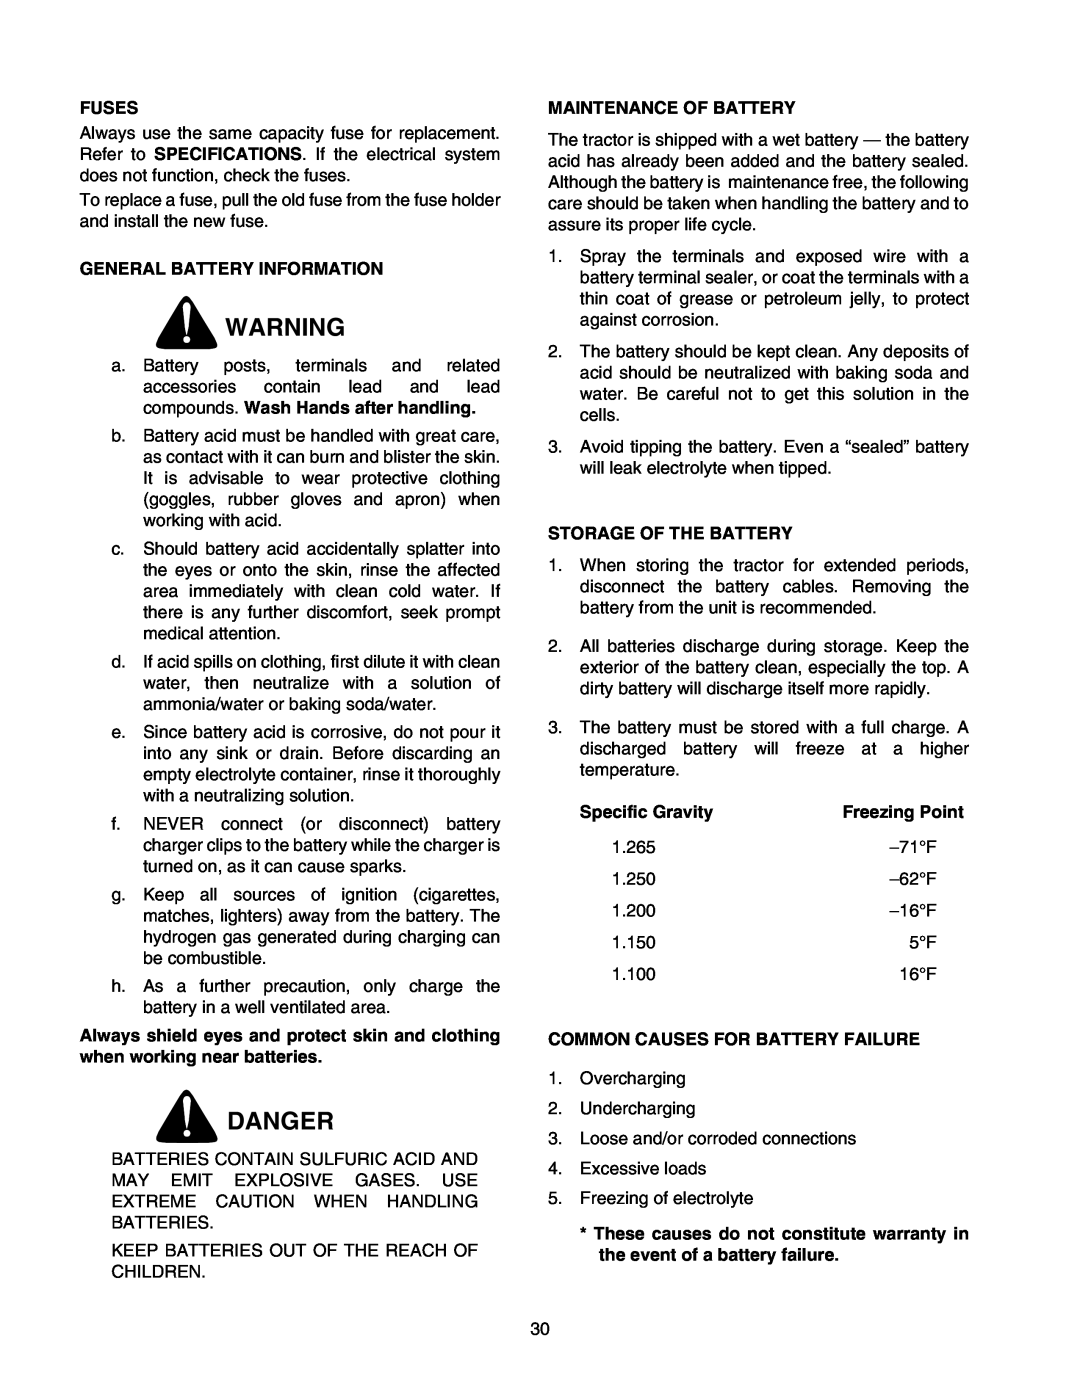 Cub Cadet 2176 manual Danger, Fuses, General Battery Information, Maintenance Of Battery, Storage Of The Battery 